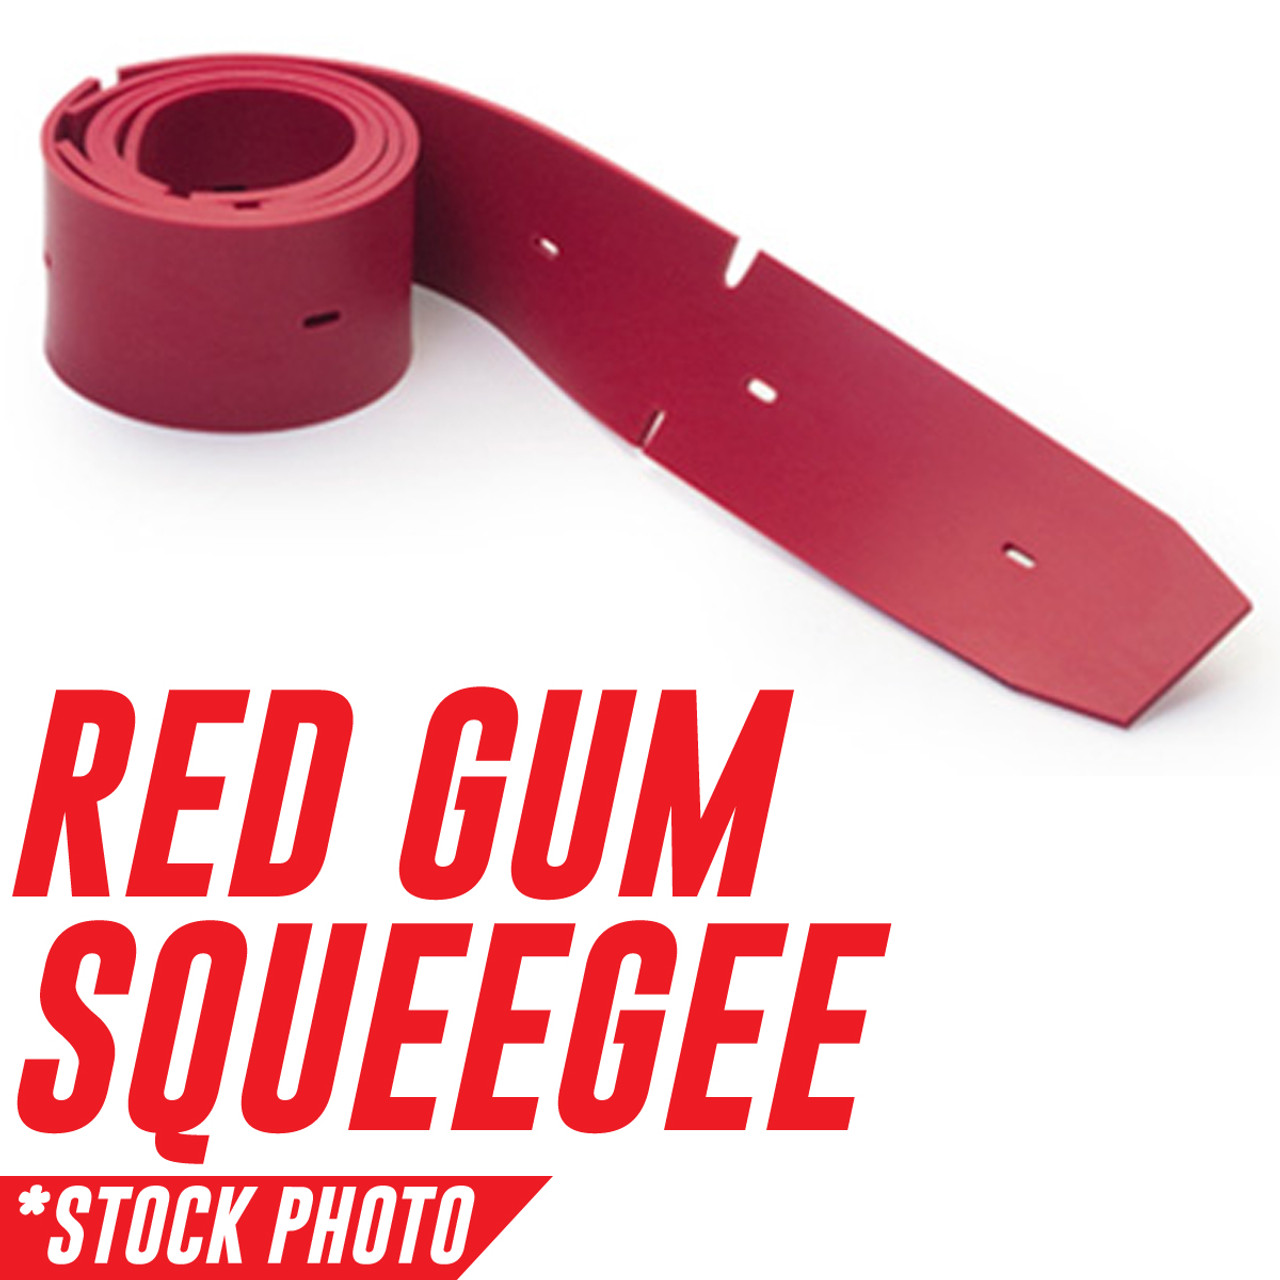 56455855: Squeegee, Front, Red Gum fits Advance-Nilfisk Models 2052